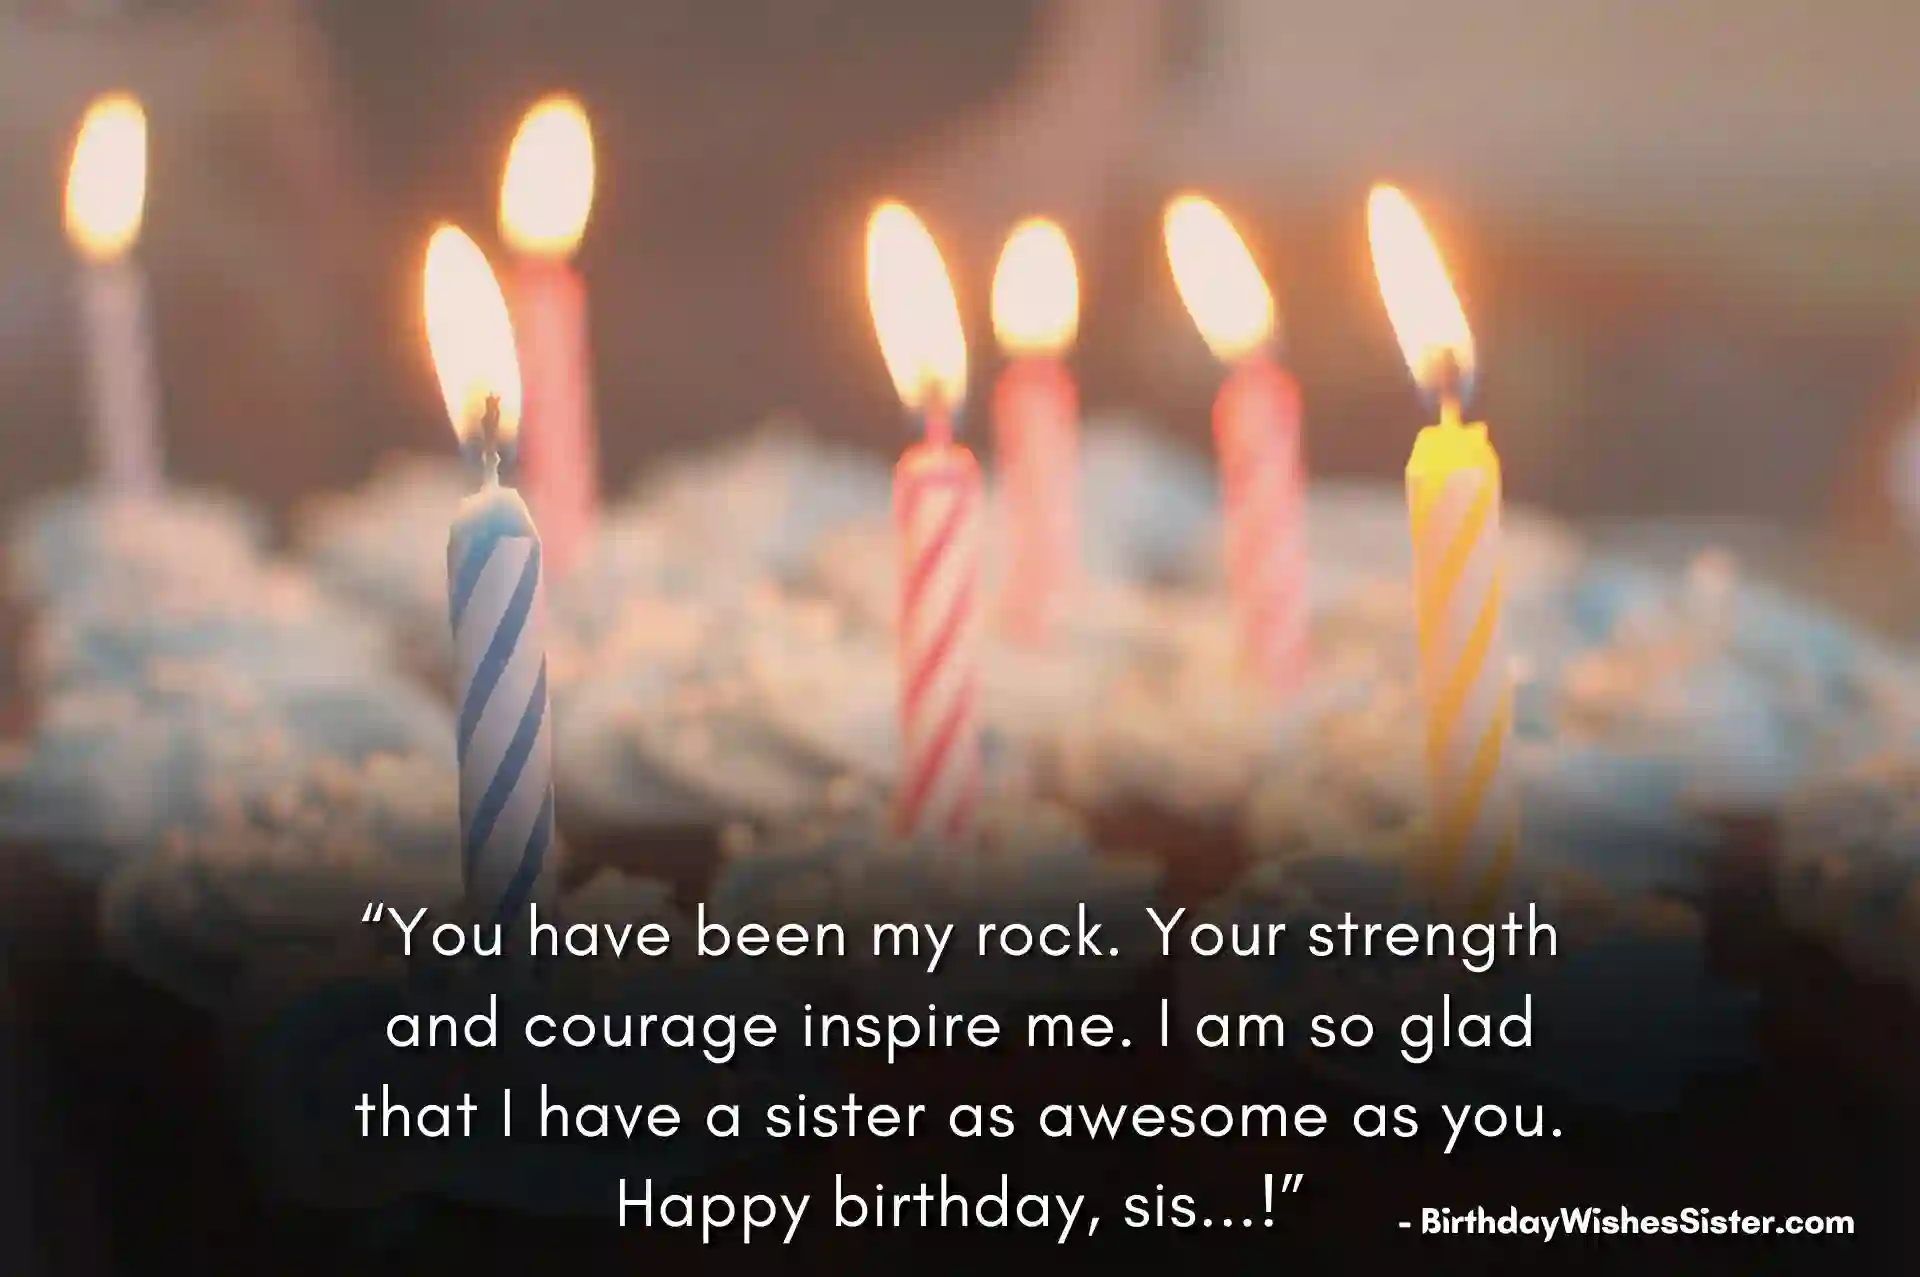 Heart Touching Lines For Sister Birthday